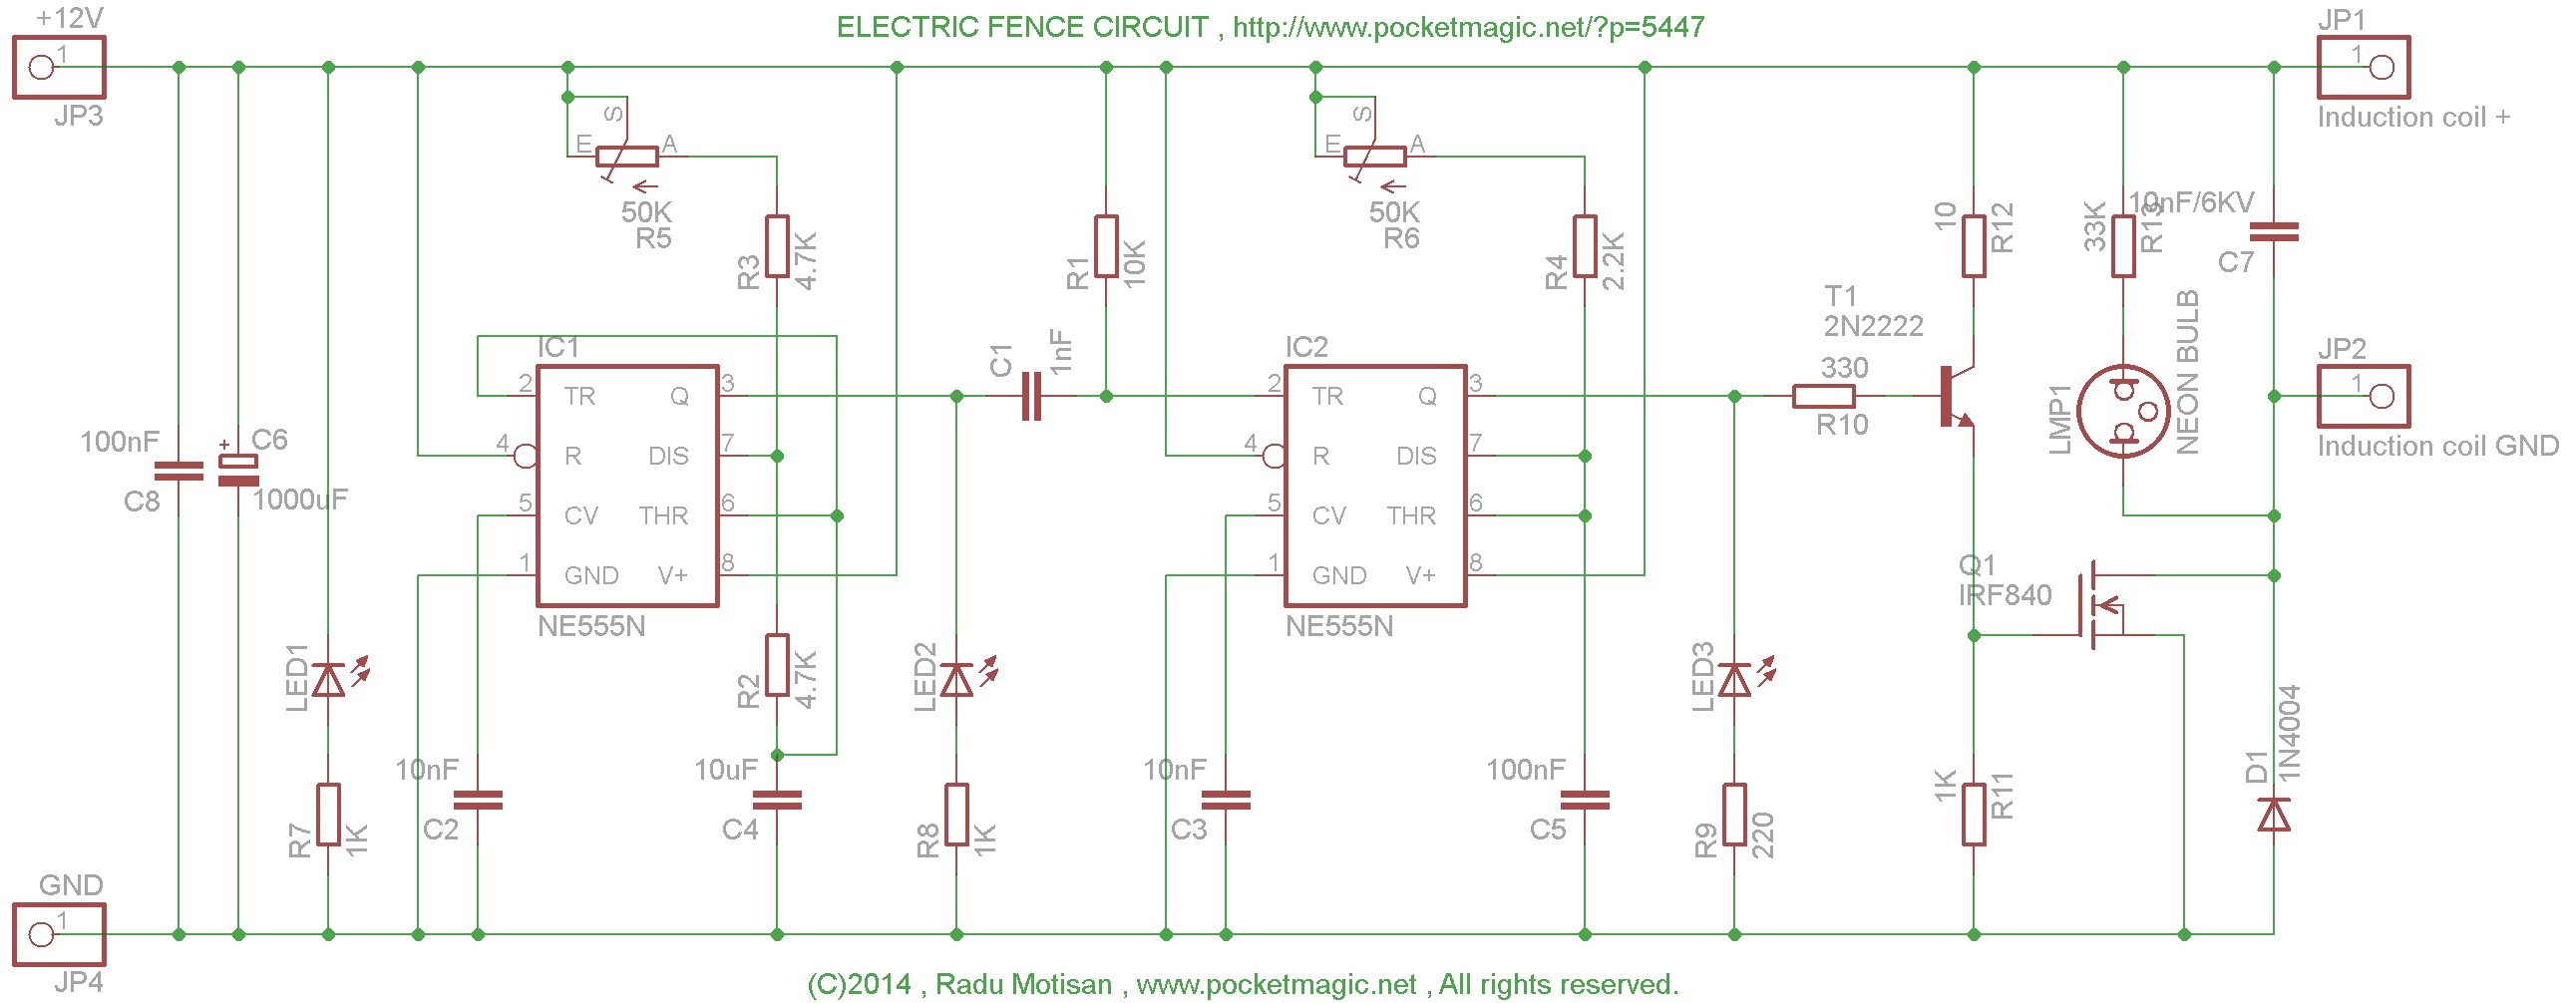 Electric Fence Circuit For Perimeter Protection Pocketmagic